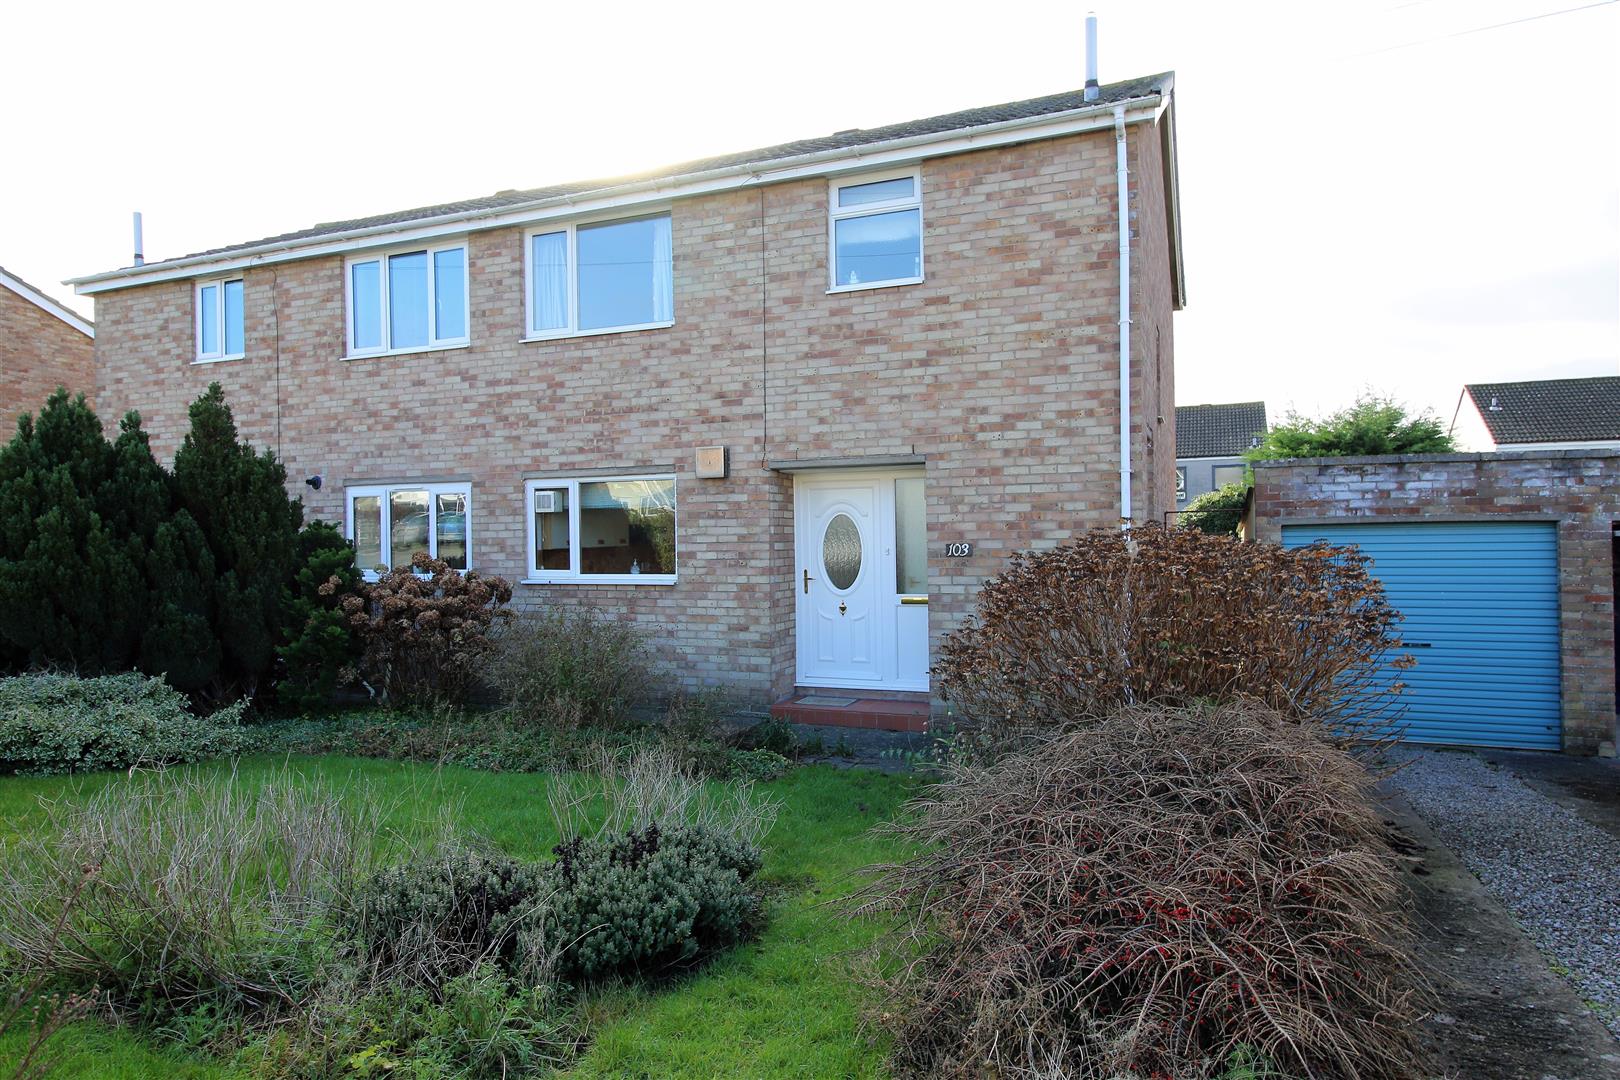 Three bedroom home located centrally in the village of Yatton